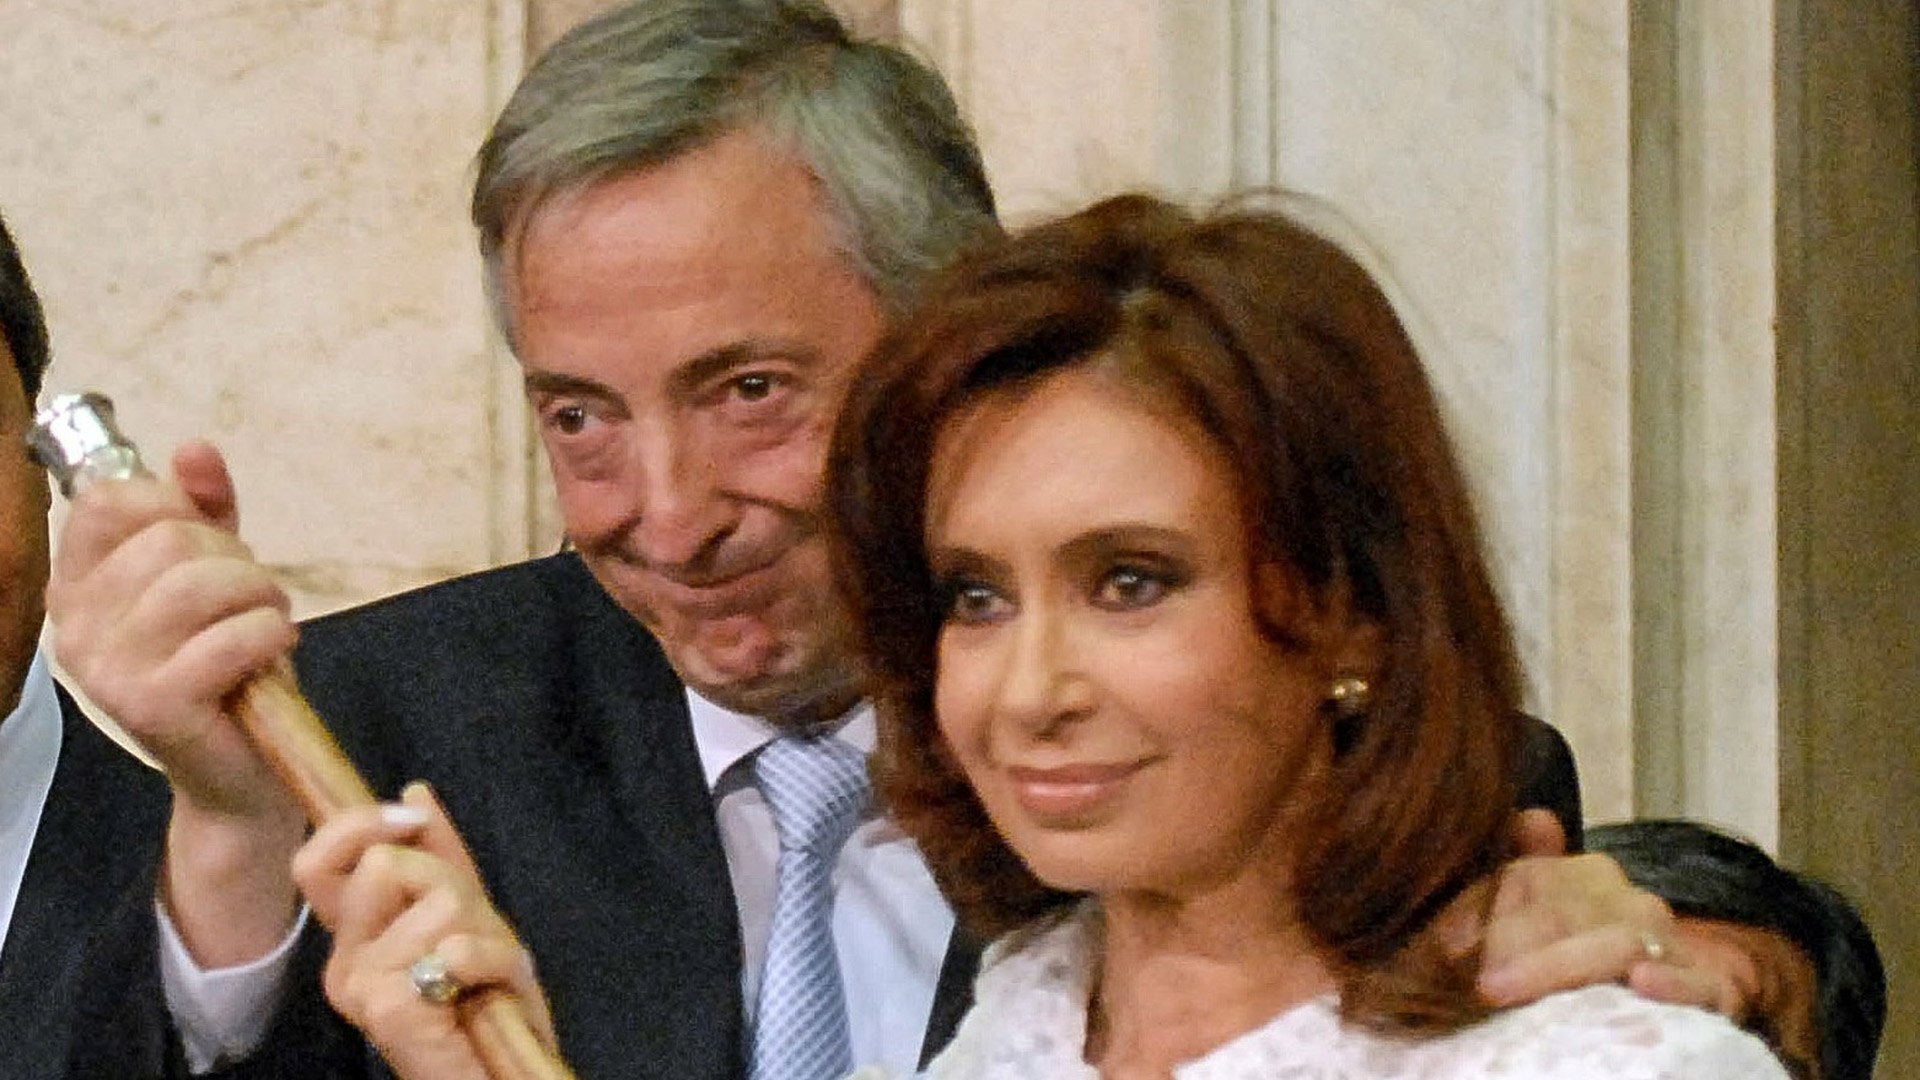 The group K revived the criticism of Néstor and Cristina Kirchner to the Fund (Photo NA: MARCELO CAPECE)